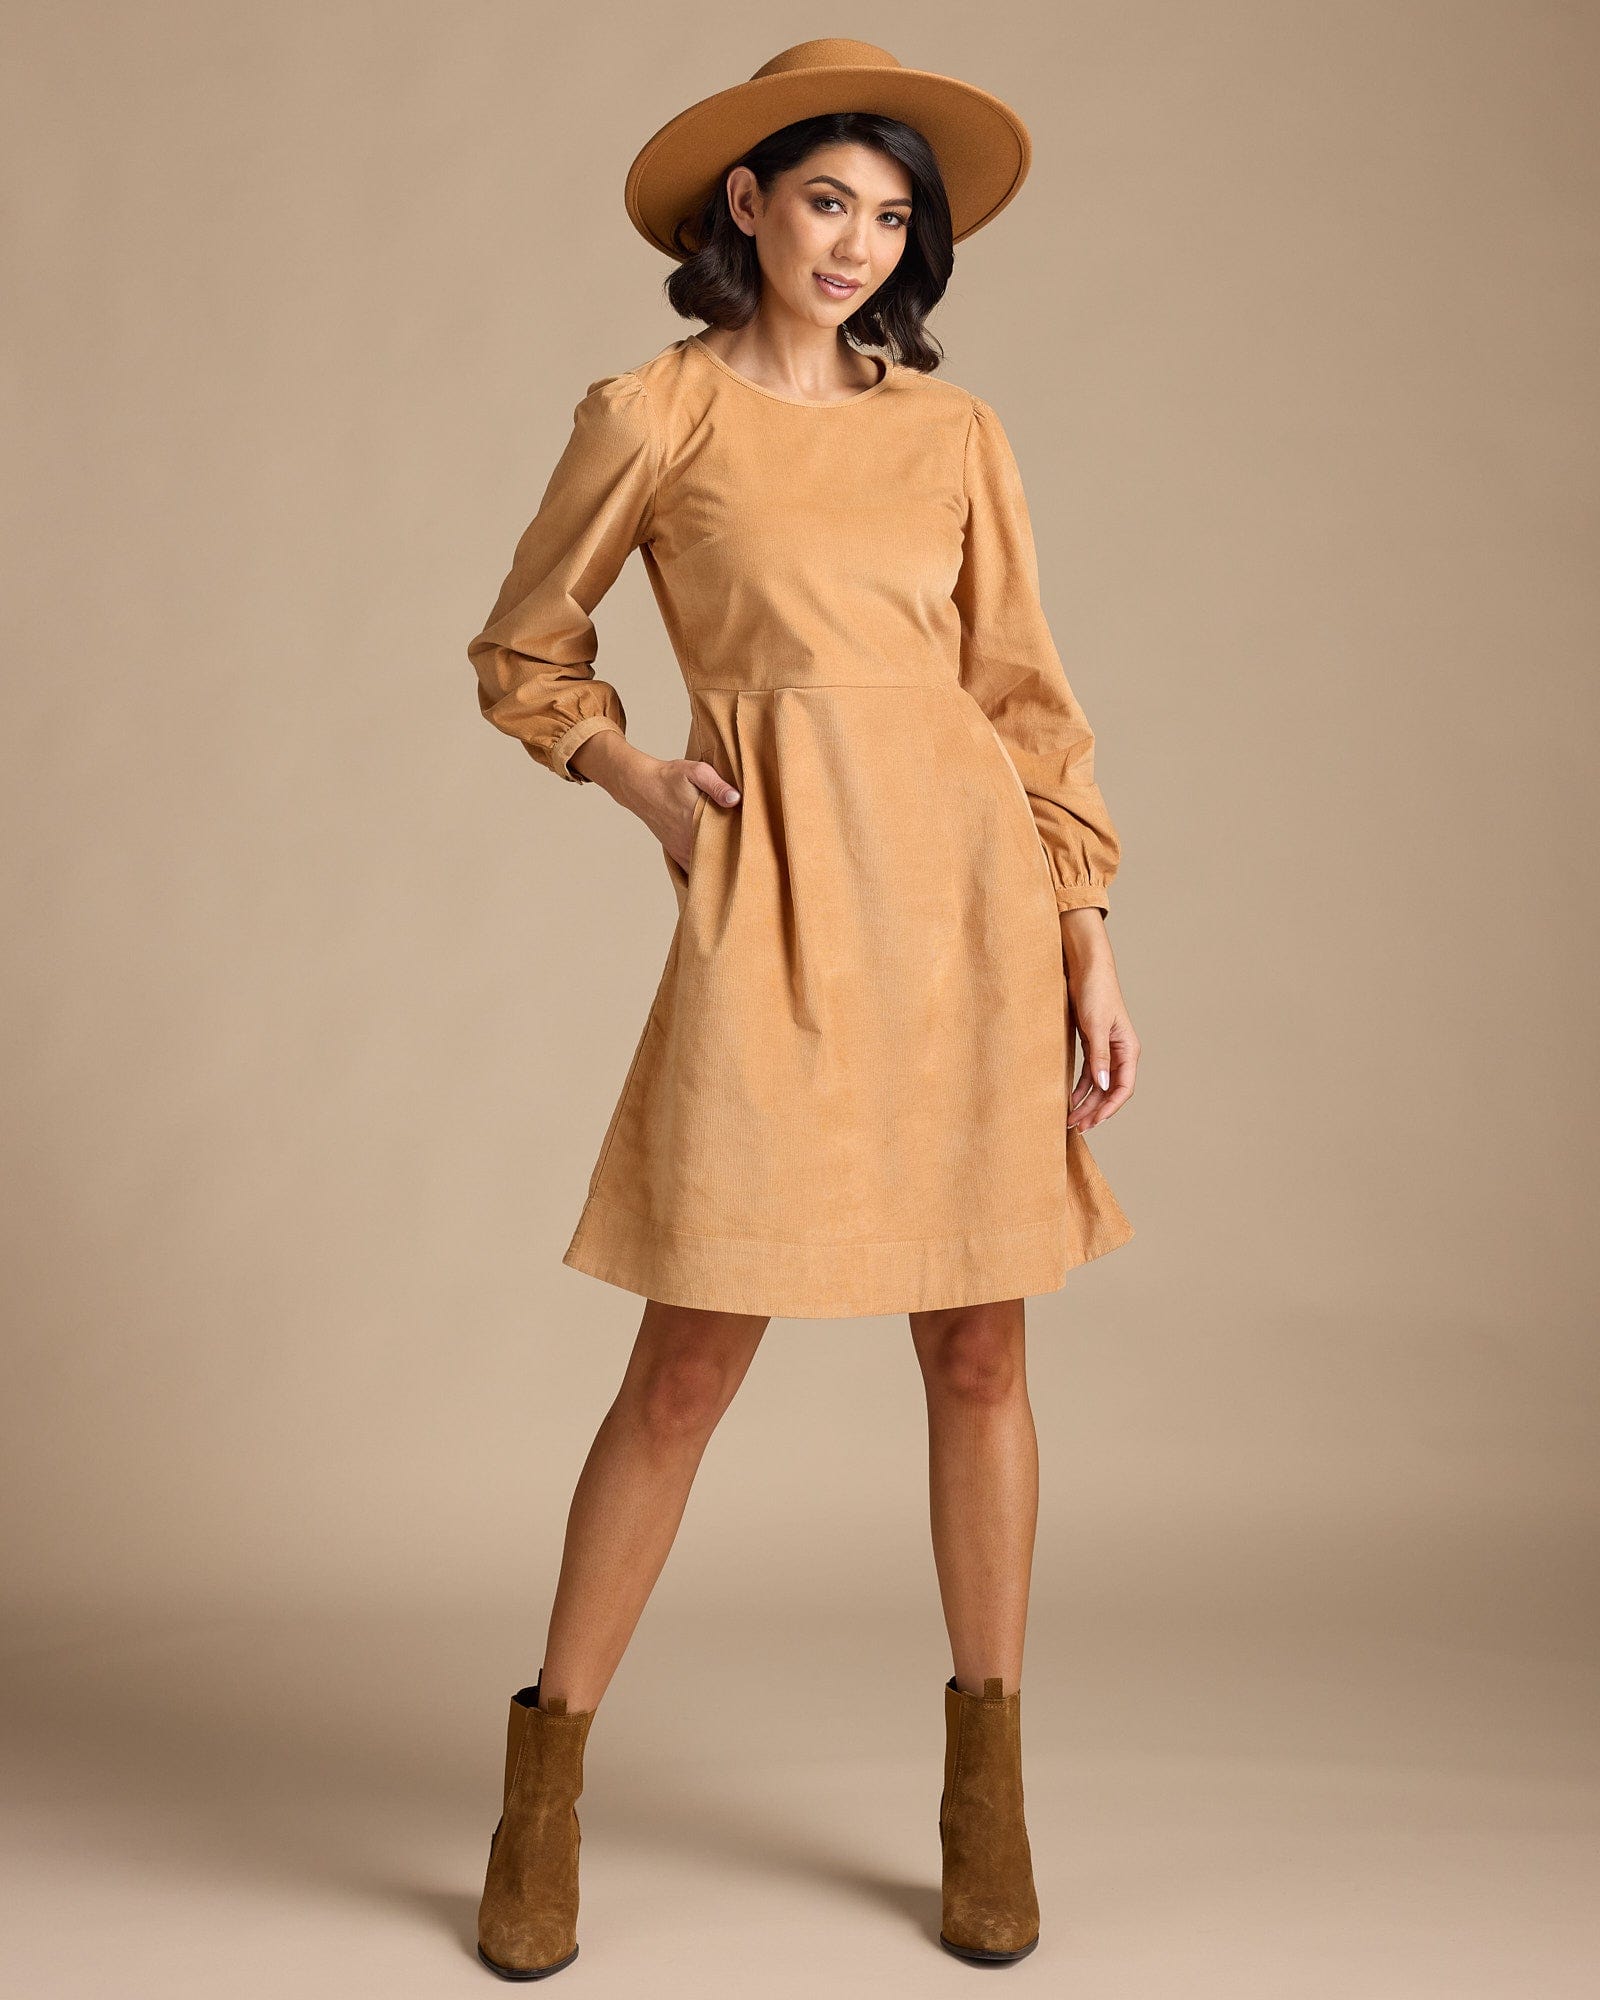 Woman in a long sleeve, knee-length, yellow dress